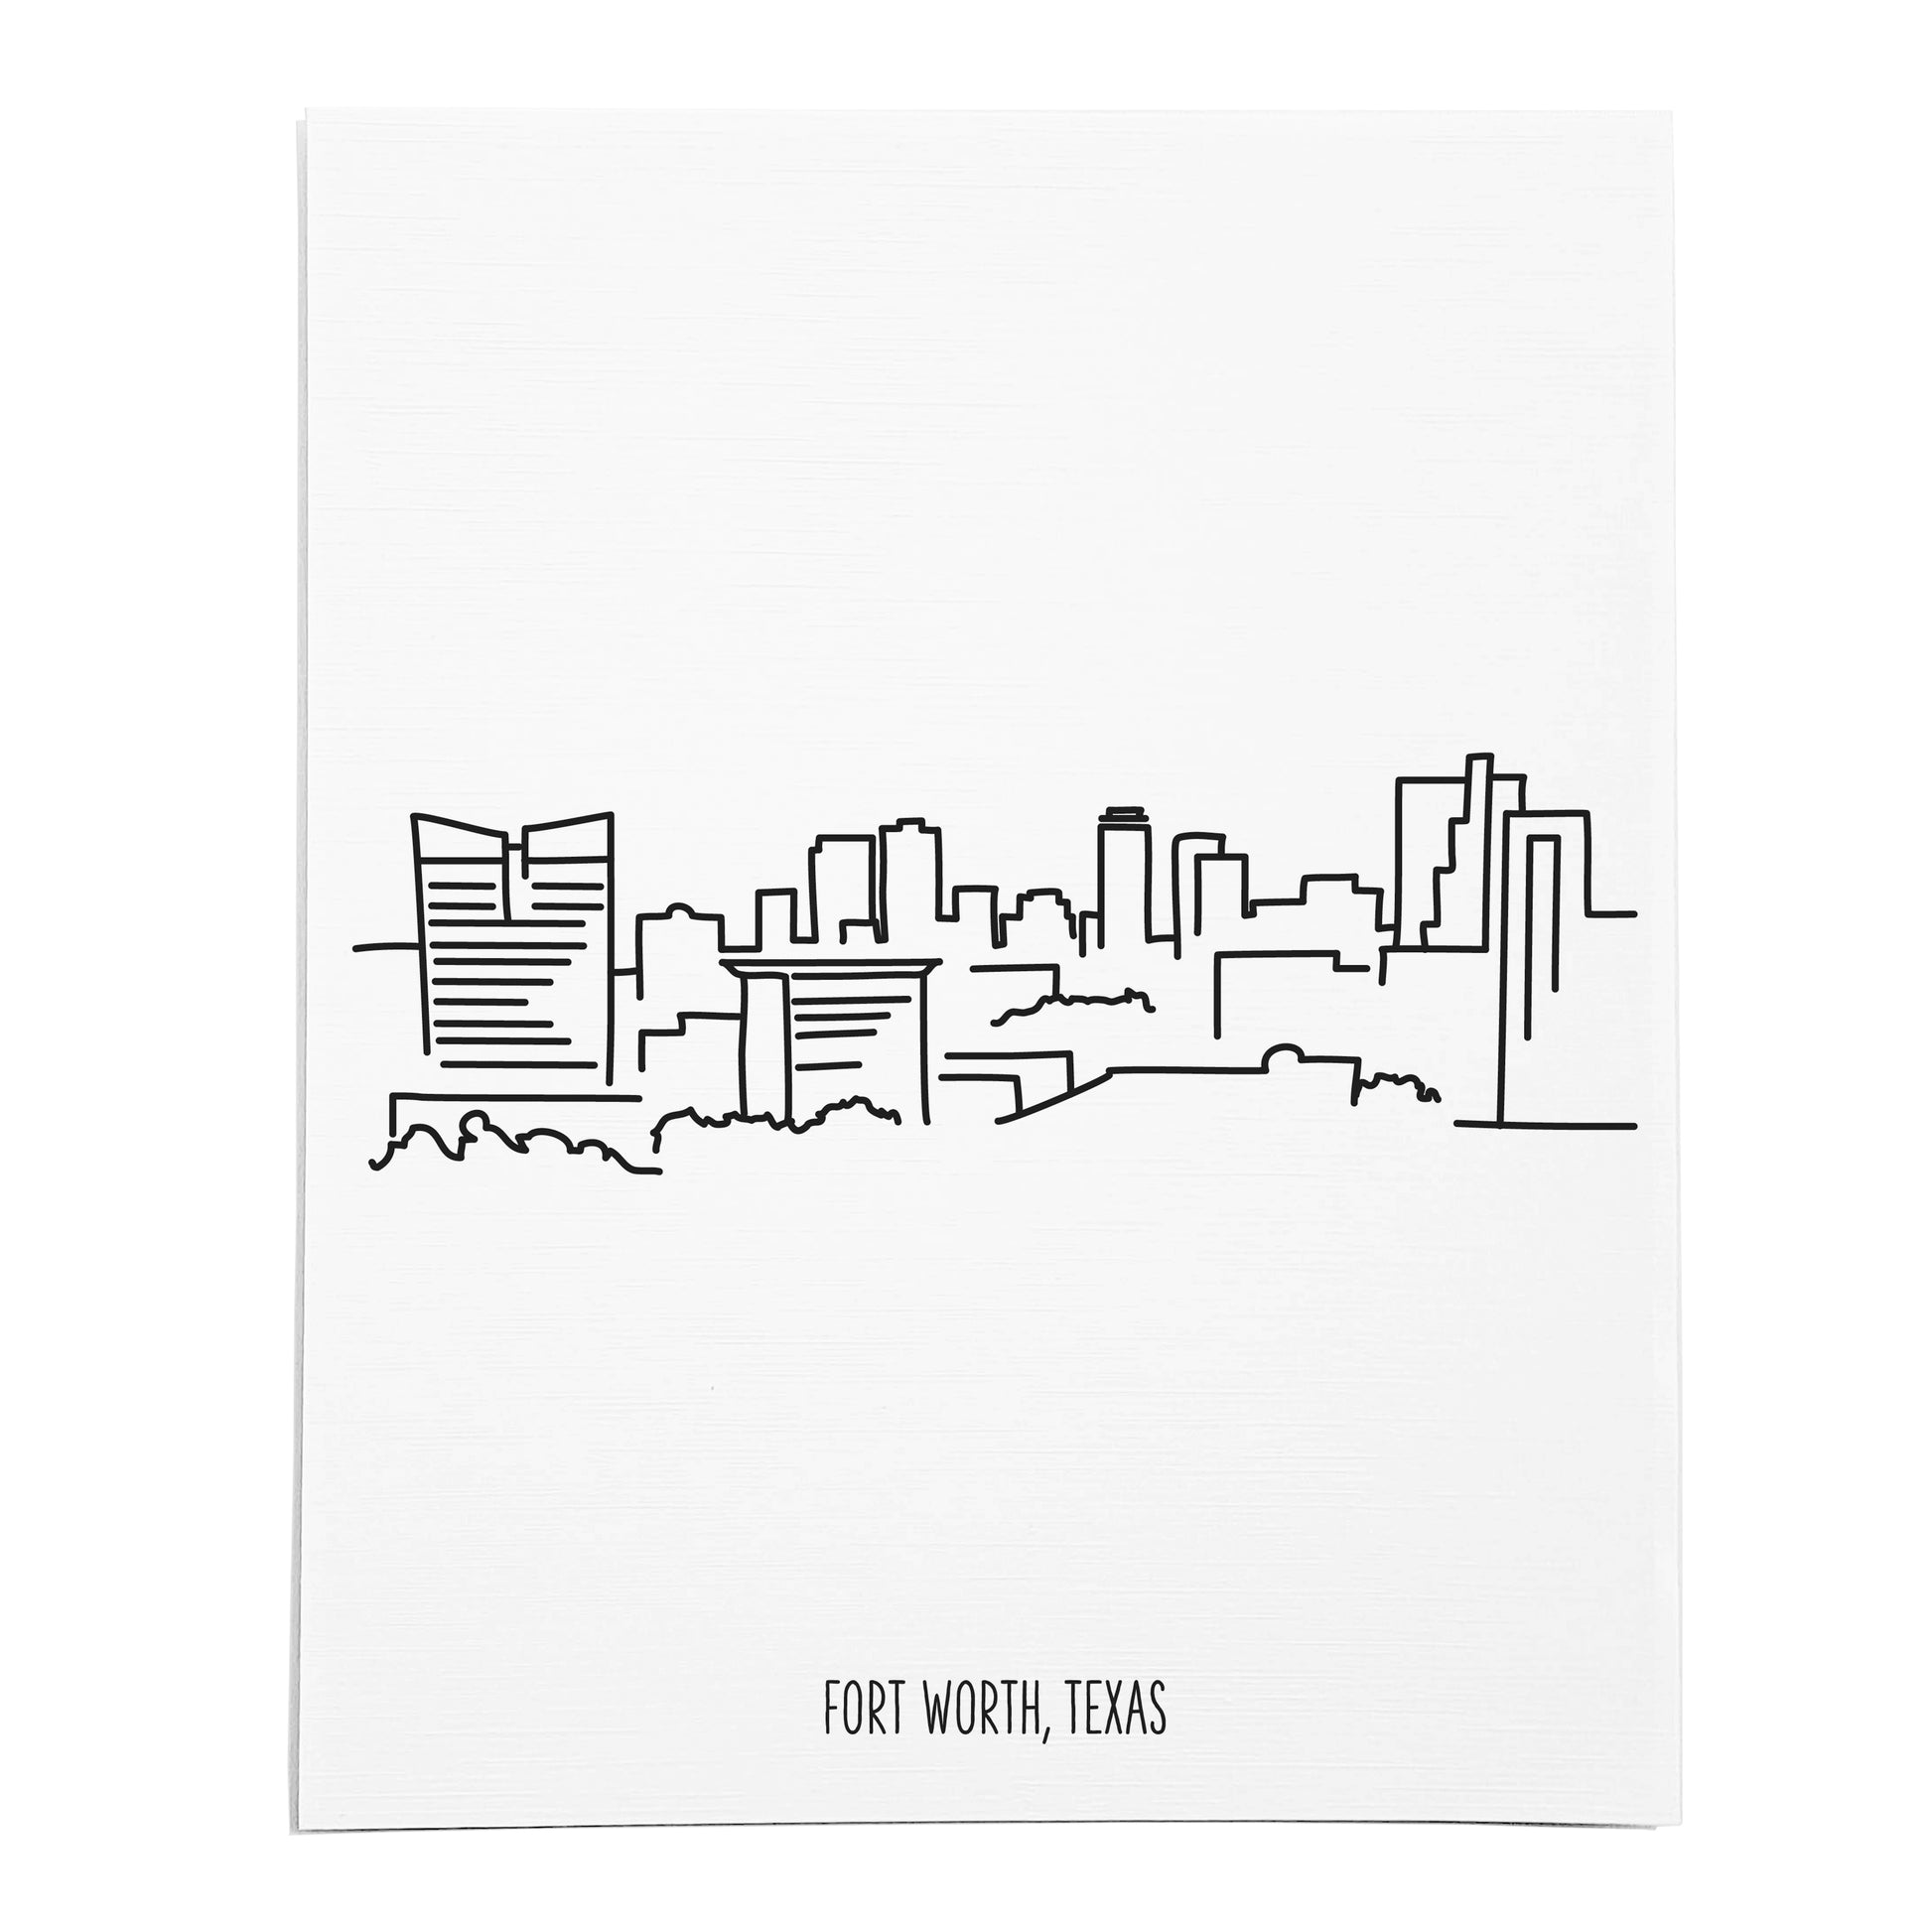 An art print featuring a line drawing of the Fort Worth Skyline on white linen paper